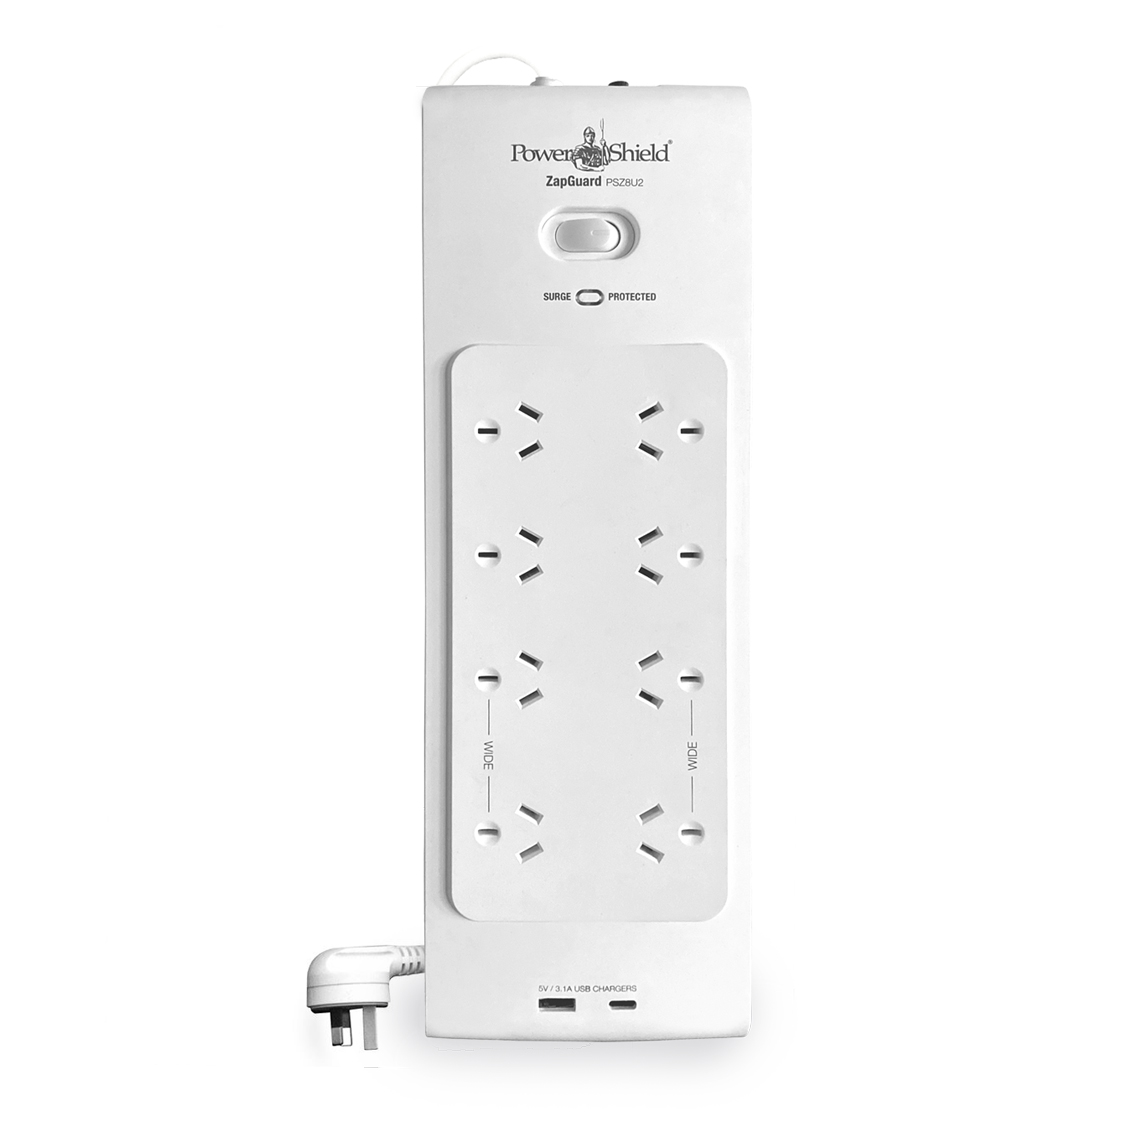  ZapGuard 8 Way Power Surge Filter Board, USB A / C Connectors, Wide Spaced Sockets, Wall Mountable,$60,000 Connected Equipment  